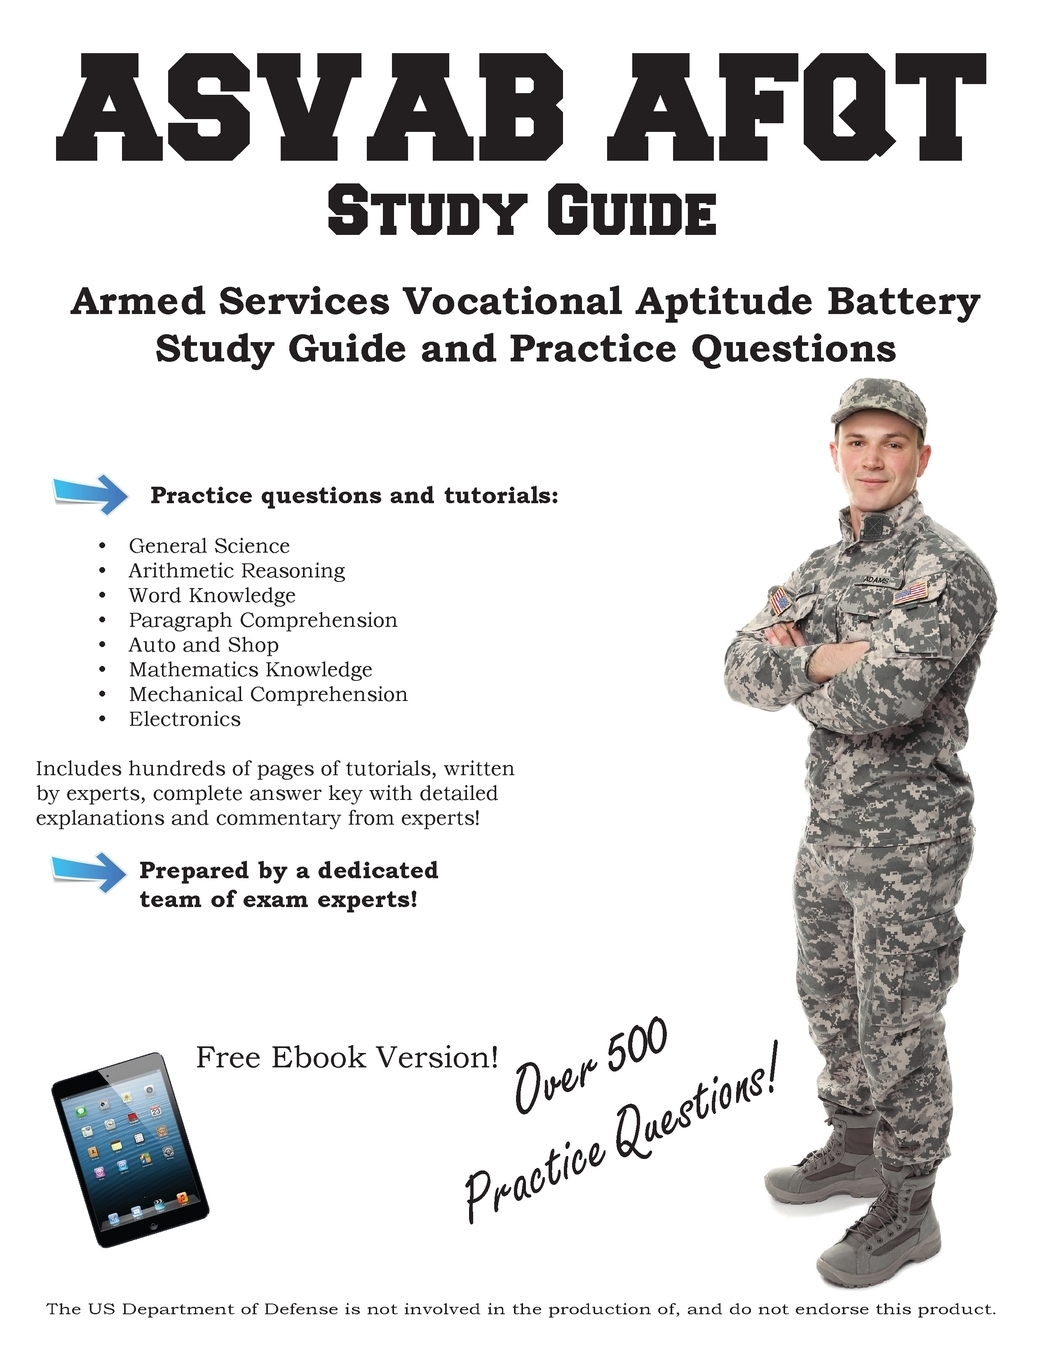 Asvab Armed Services Vocational Aptitude Battery Study Guide Study Poster